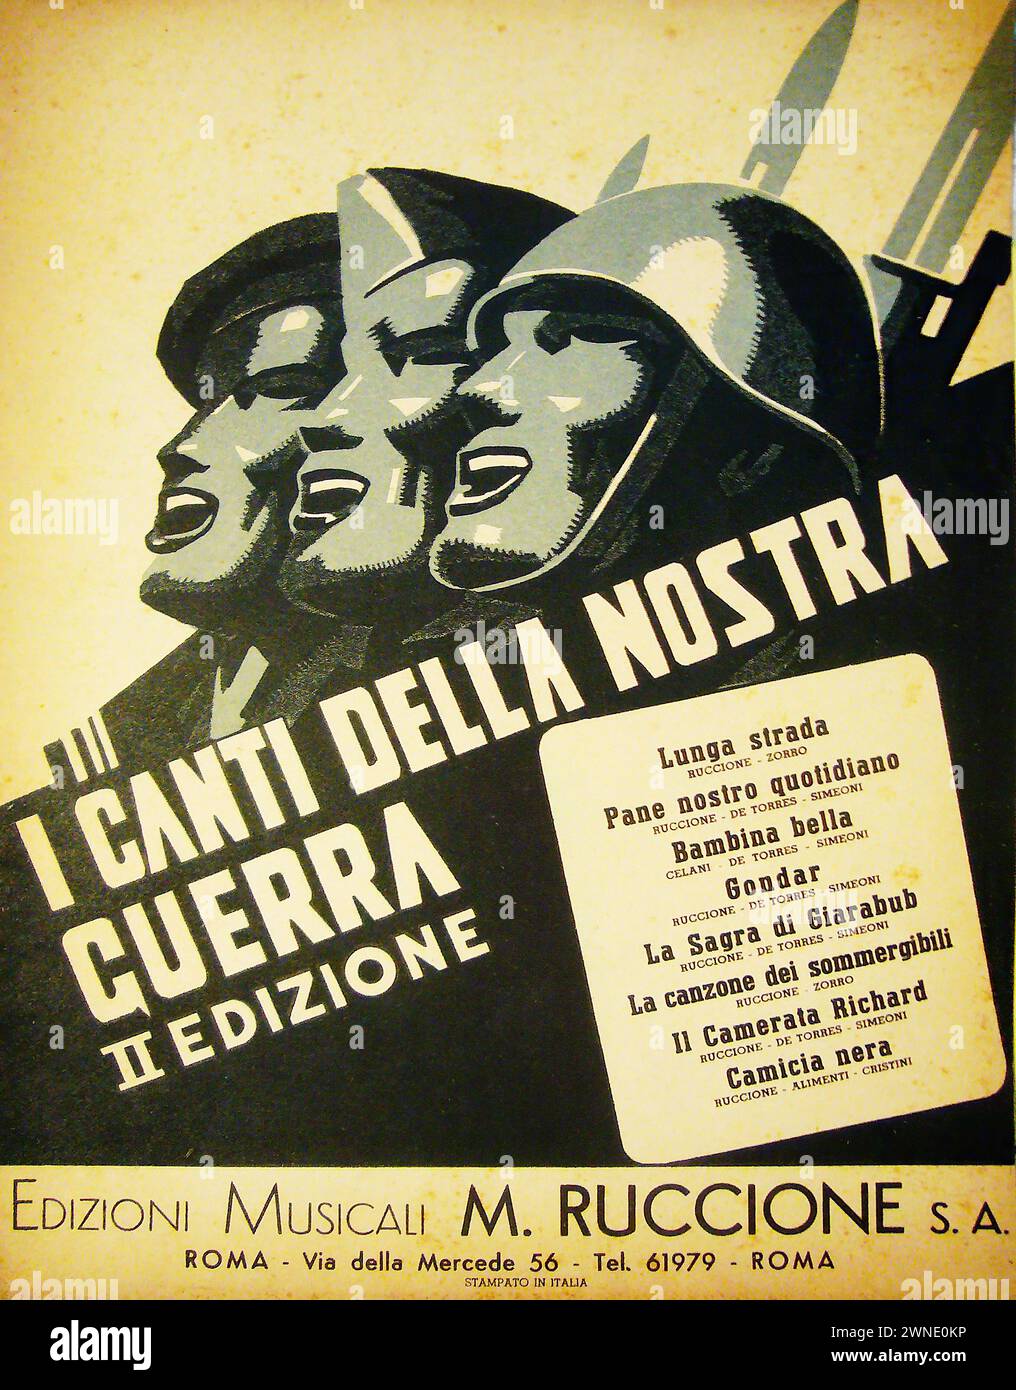 'I CANTI DELLA NOSTRA GUERRA II EDIZIONE' ['THE SONGS OF OUR WAR II EDITION'] Vintage Italian Advertising for music sheets with three male faces in profile, singing, against a background of music notes and bayonets. The design is stark and propagandistic, typical of mid-20th century wartime graphics Stock Photo